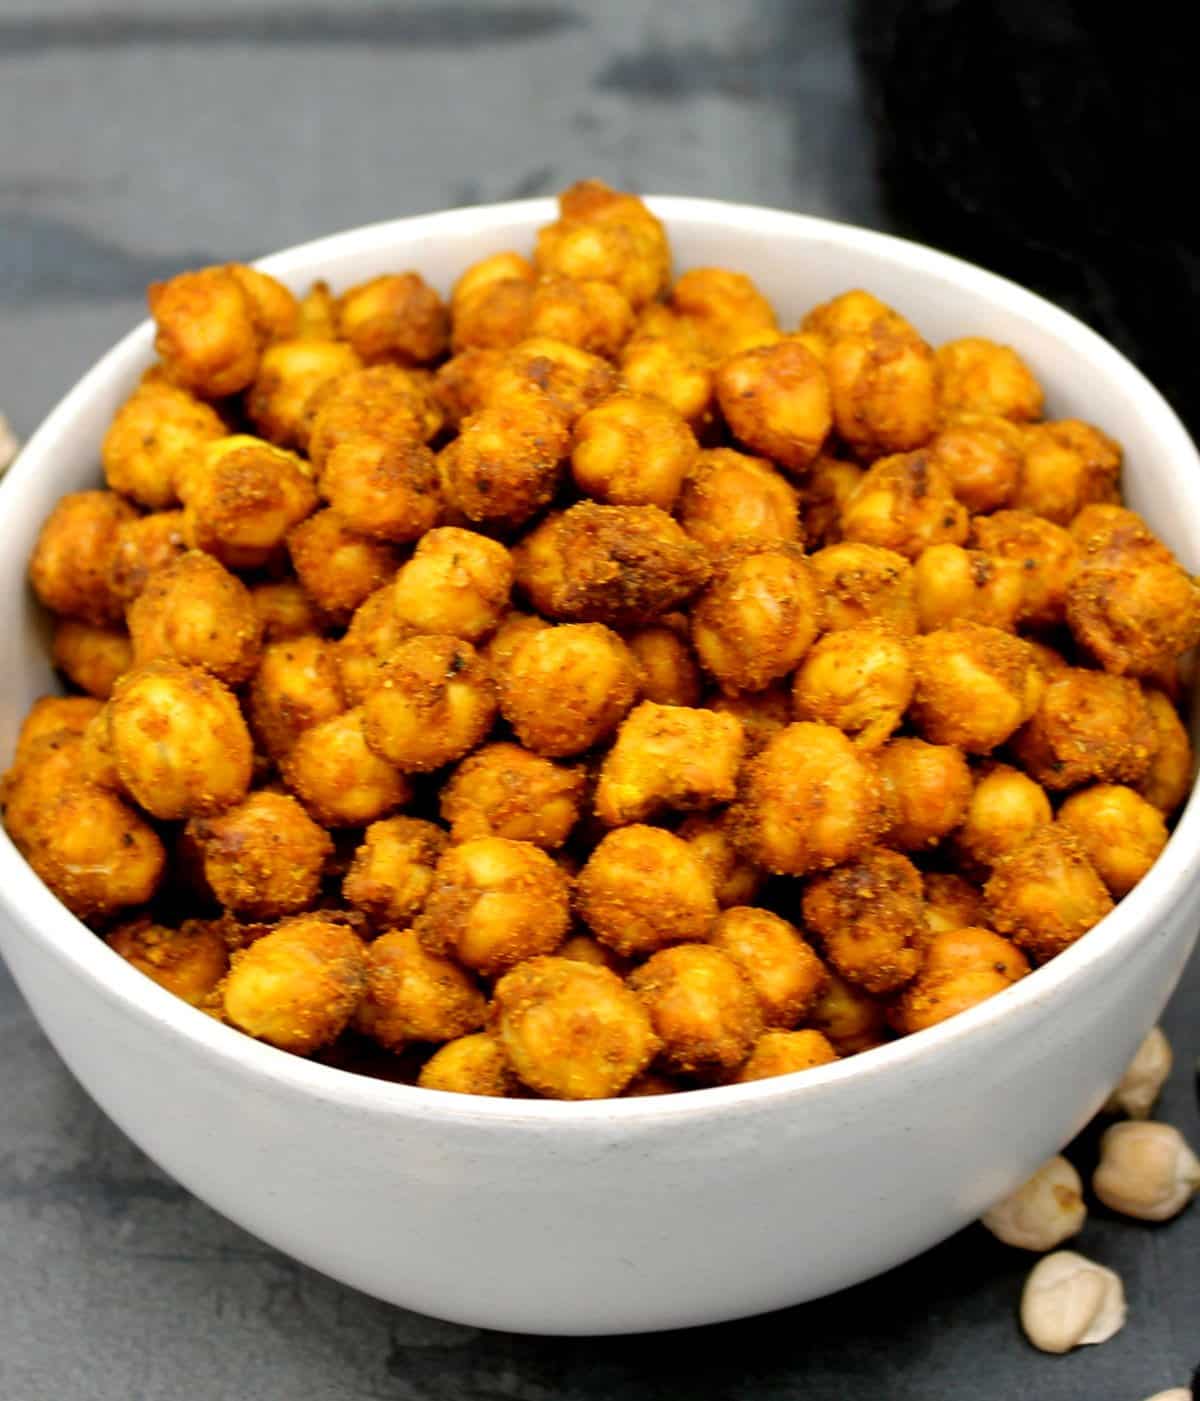 Spicy, tangy air fryer chickpeas in gray bowl with chickpeas scattered around.